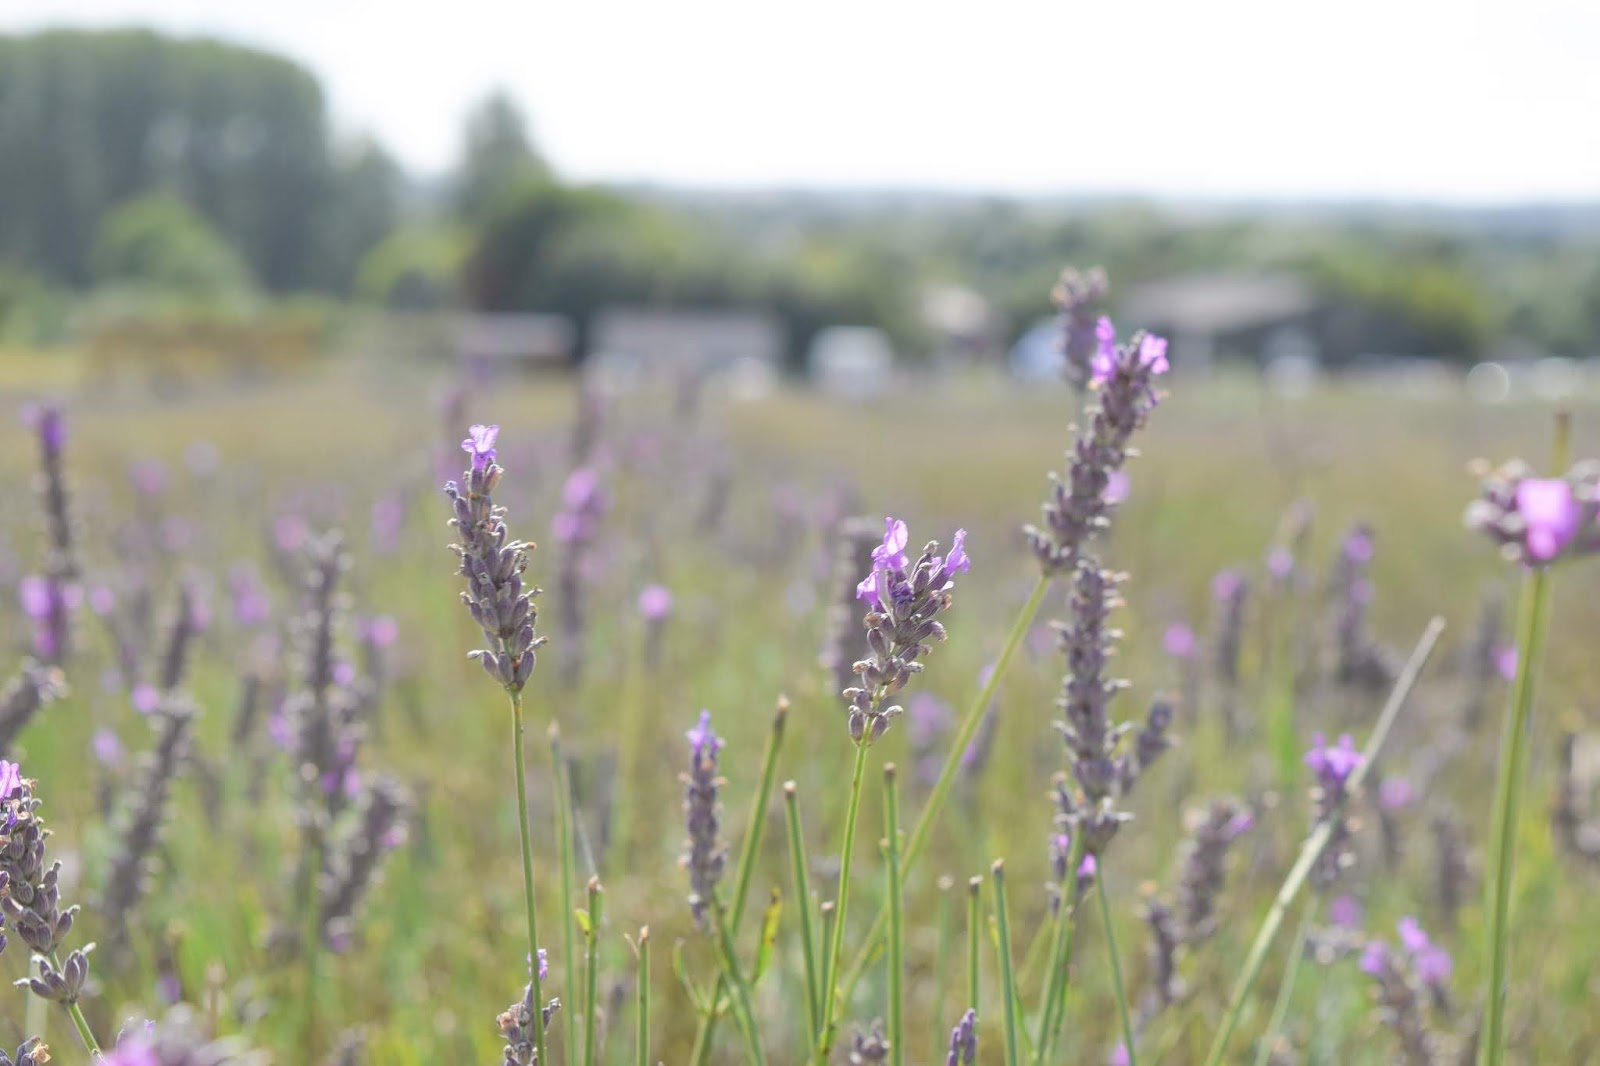 A close up photograph of the lavender heads with the rest of the field blurred behind.